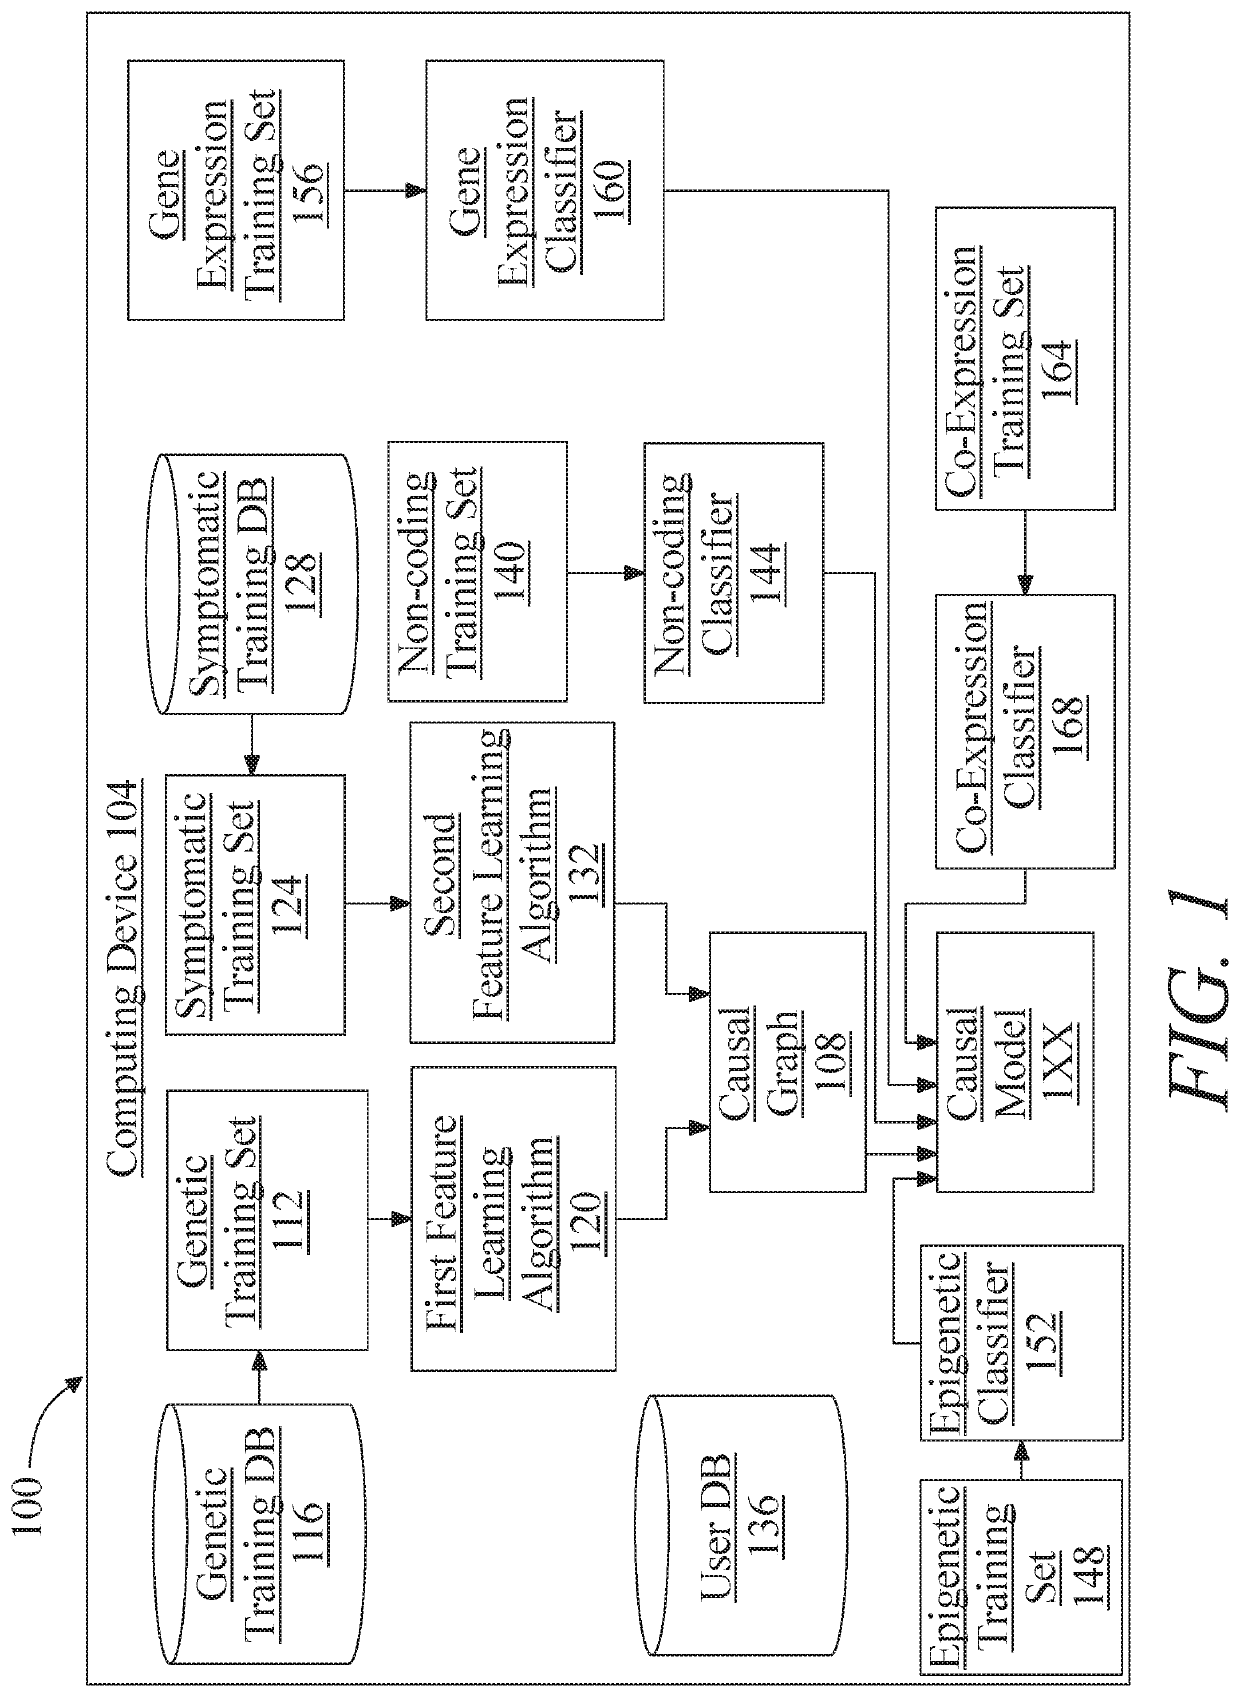 Systems and methods for generating a genotypic causal model of a disease state